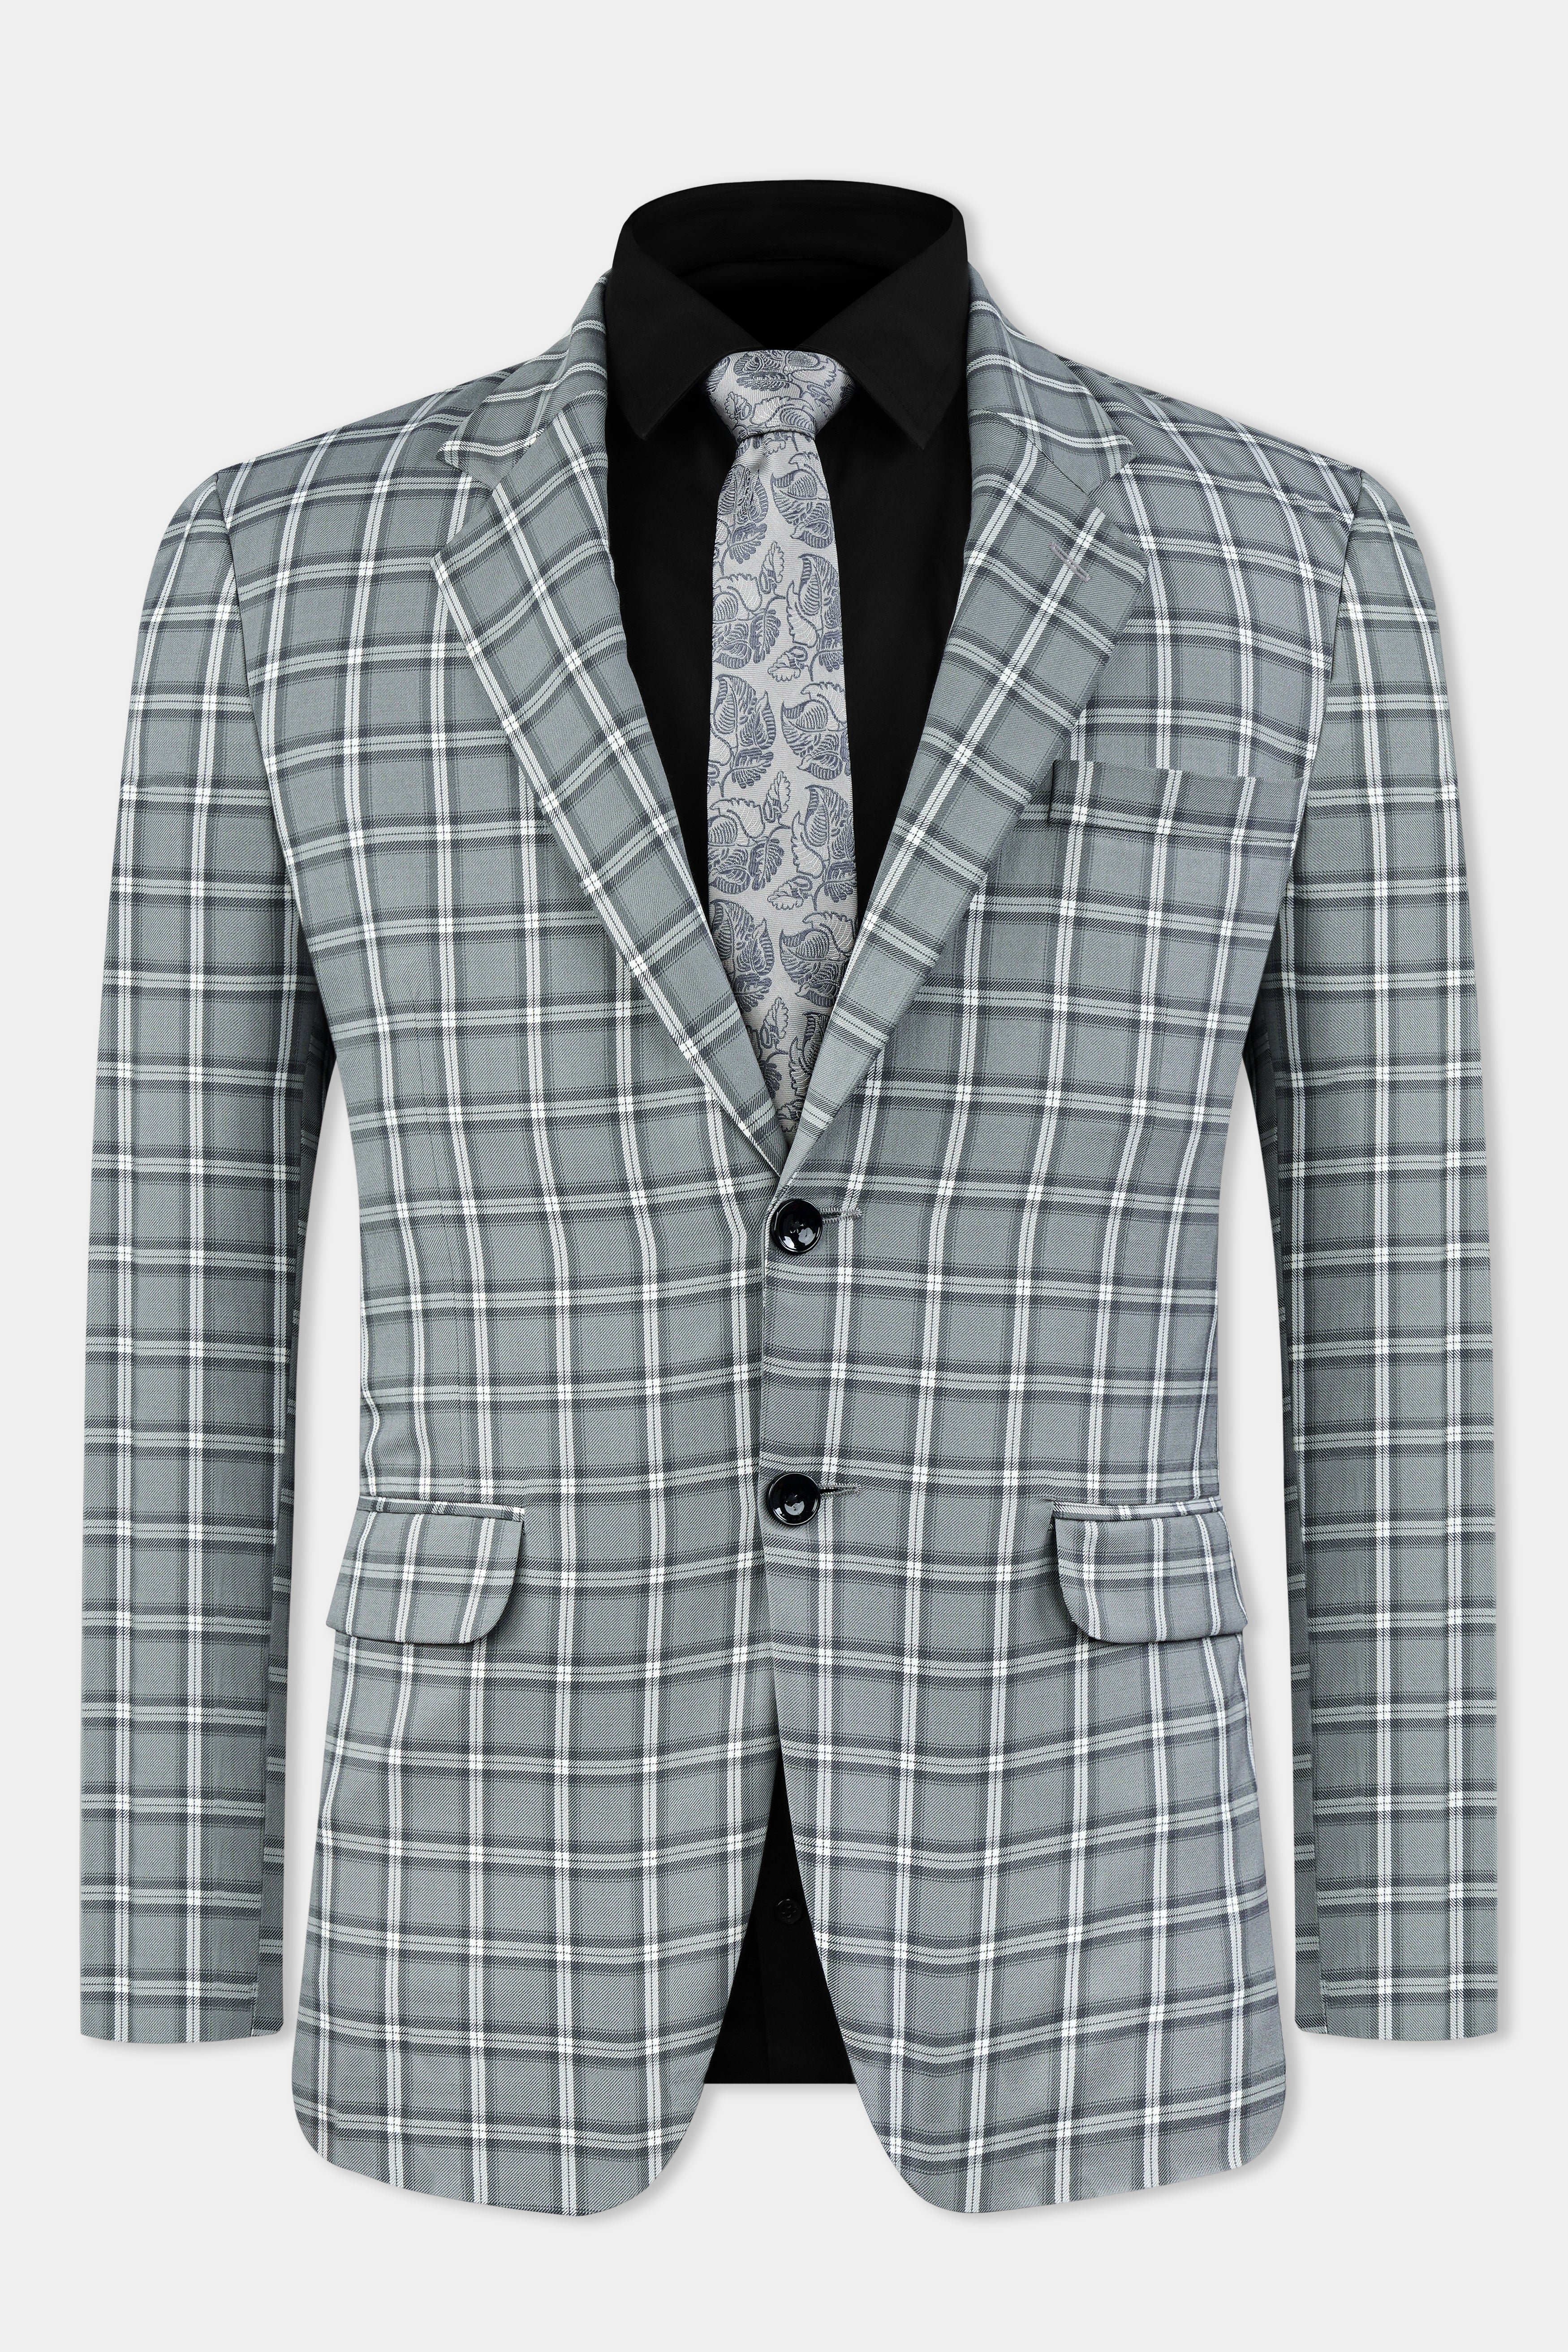 Pewter Gray and White Windowpane Wool Rich Blazer BL3134-SB-36, BL3134-SB-38, BL3134-SB-40, BL3134-SB-42, BL3134-SB-44, BL3134-SB-46, BL3134-SB-48, BL3134-SB-50, BL3134-SB-52, BL3134-SB-54, BL3134-SB-56, BL3134-SB-58, BL3134-SB-60